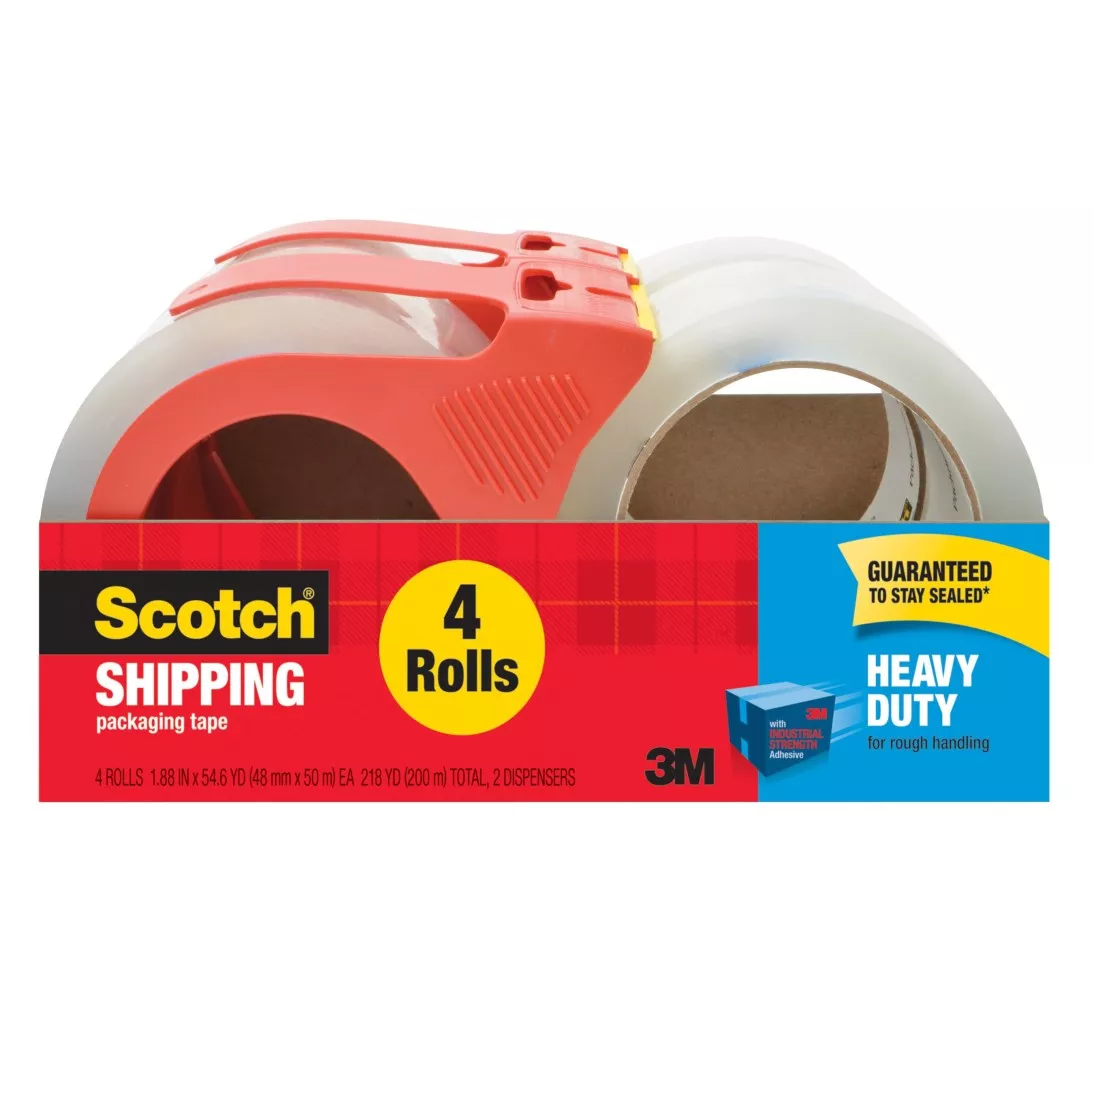 Scotch® Heavy Duty Shipping Packaging Tape 3850-4-2RD, 1.88 in x 54.6 yd
(48 mm x 50 m) 4 Rolls with 2 Dispenser